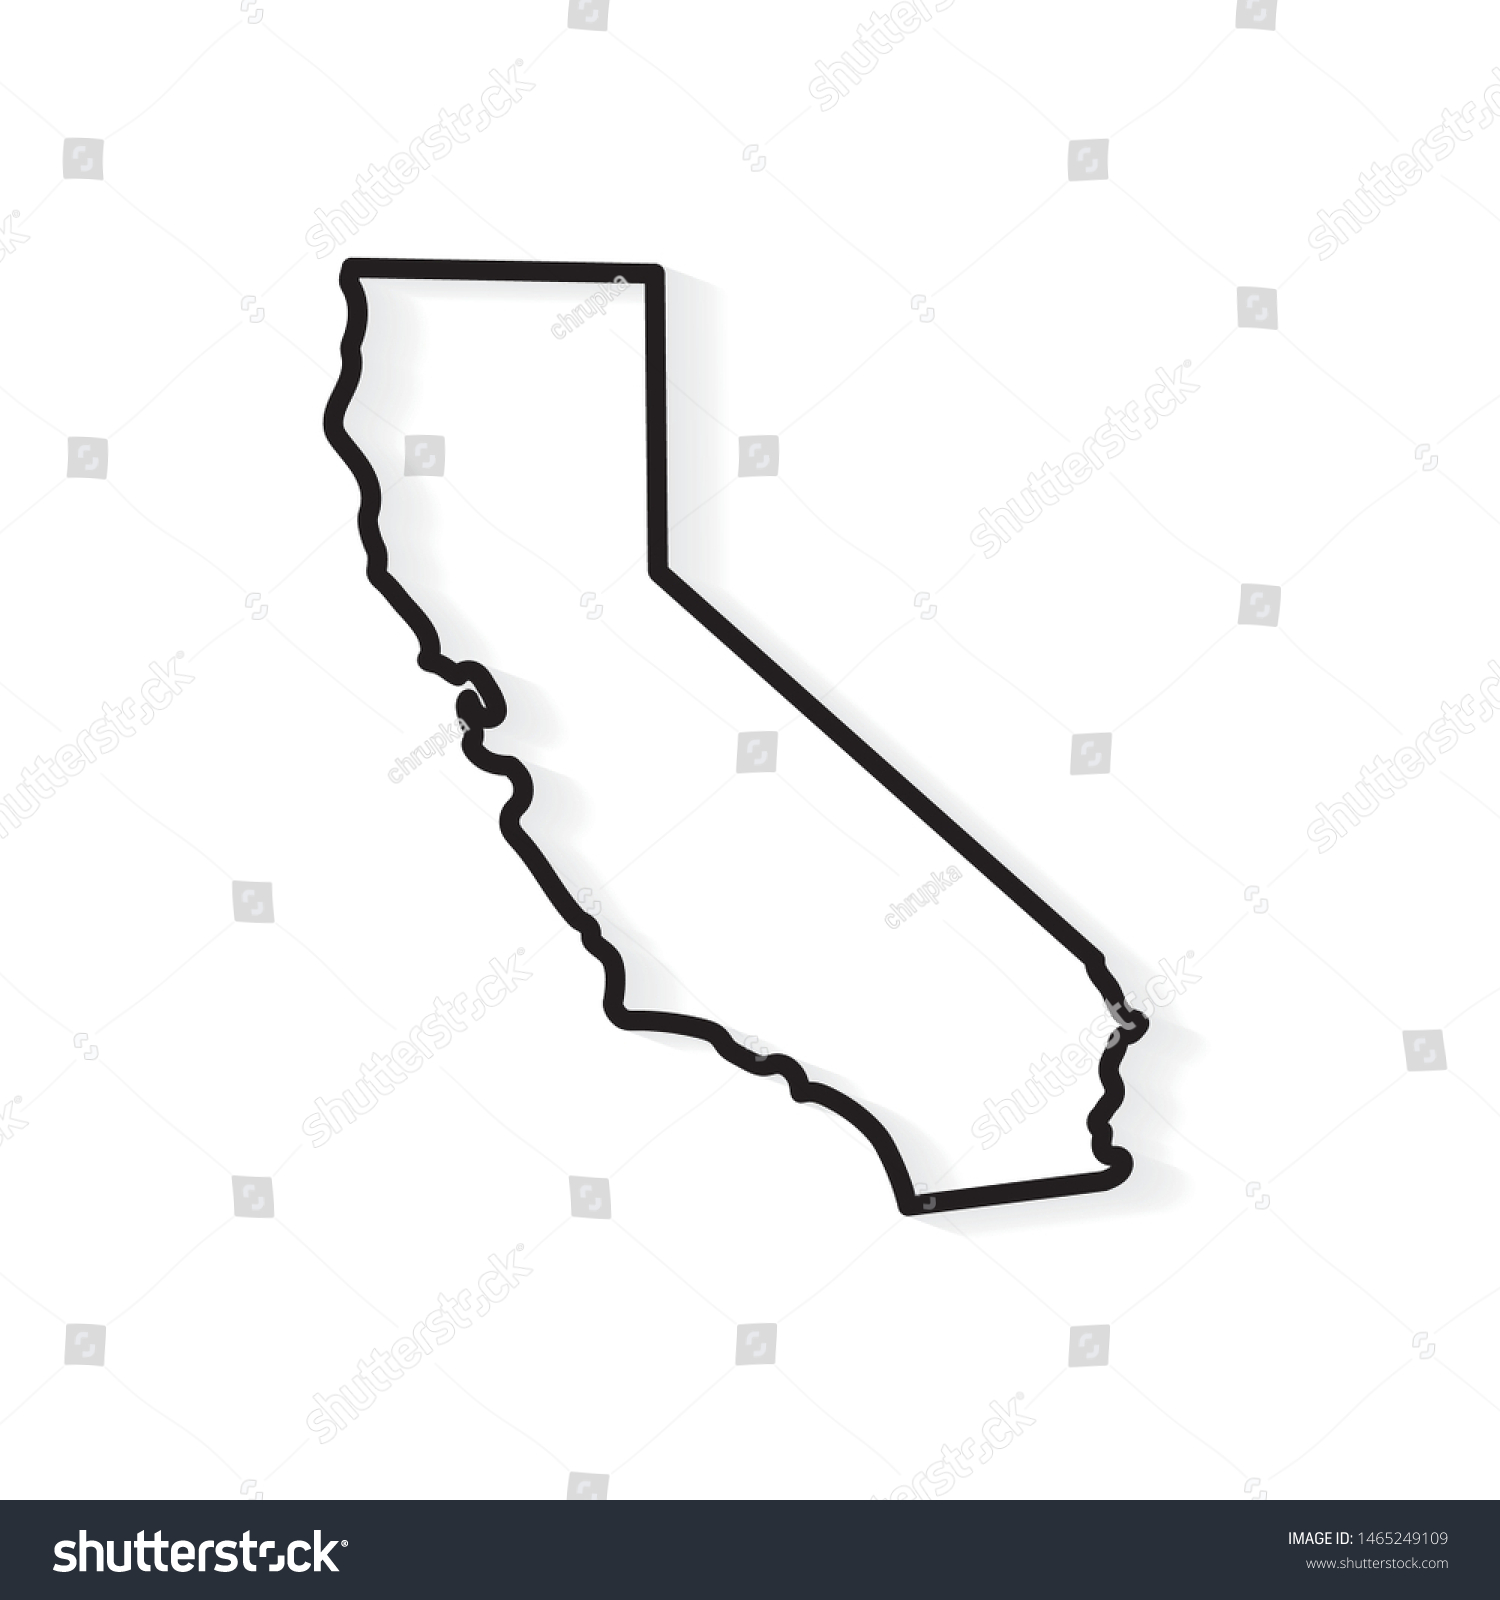 Outline California Map Vector Illustration Stock Vector Royalty Free 1465249109 4185